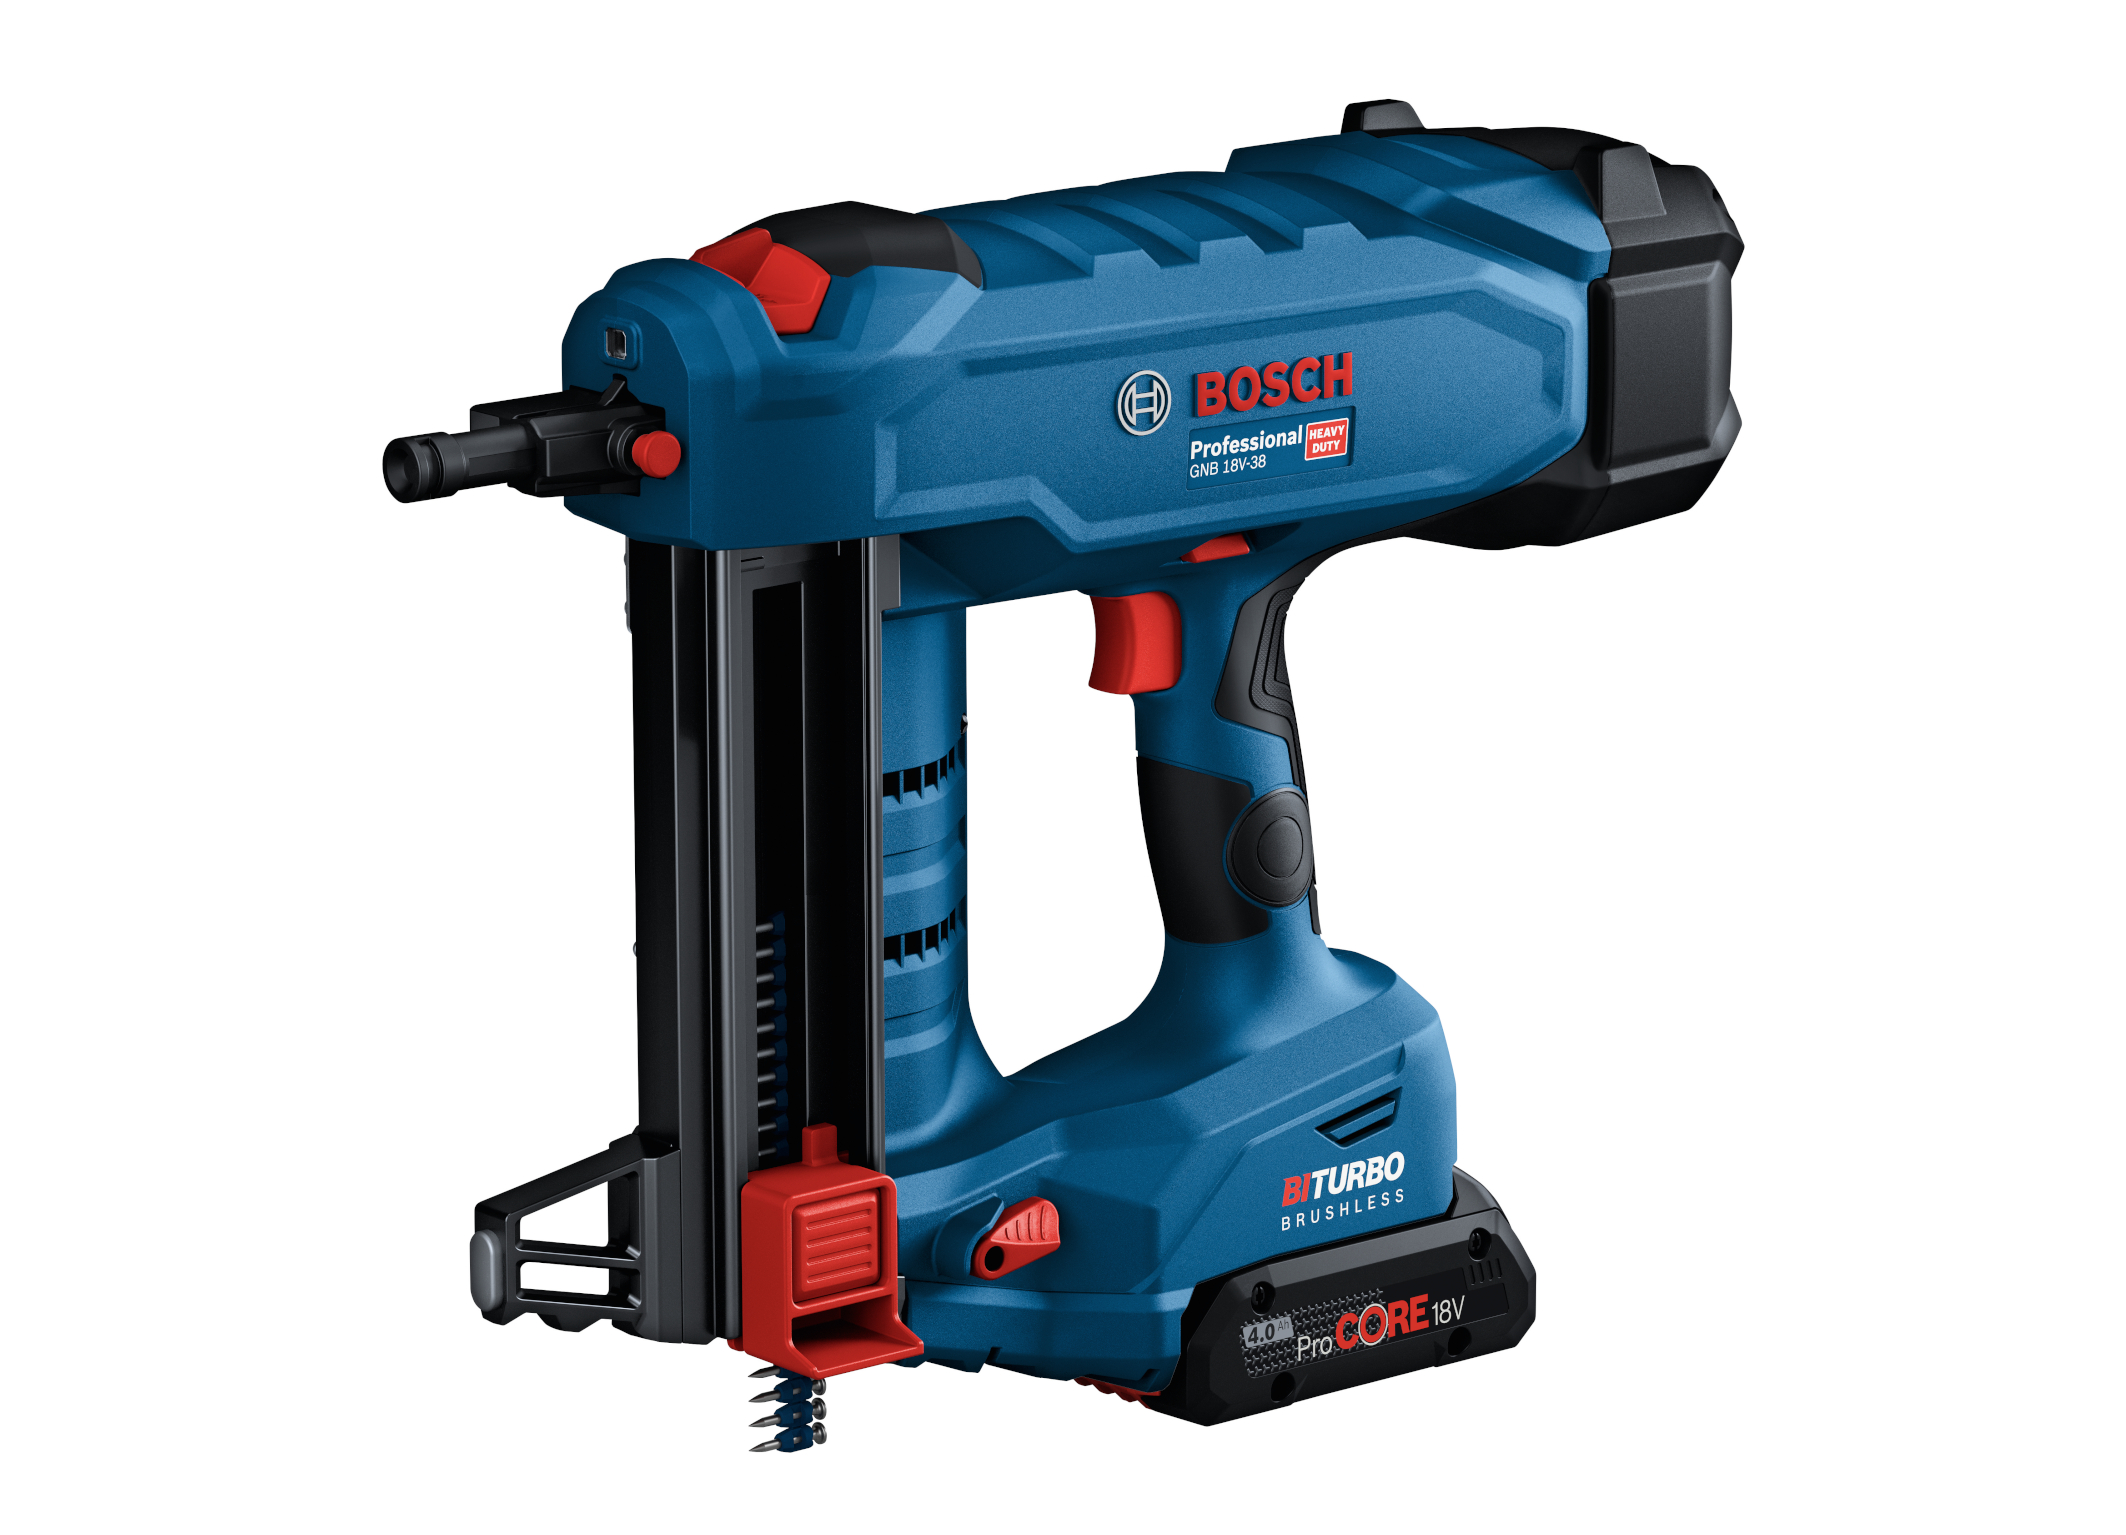 New to the Professional 18V System: First professional cordless